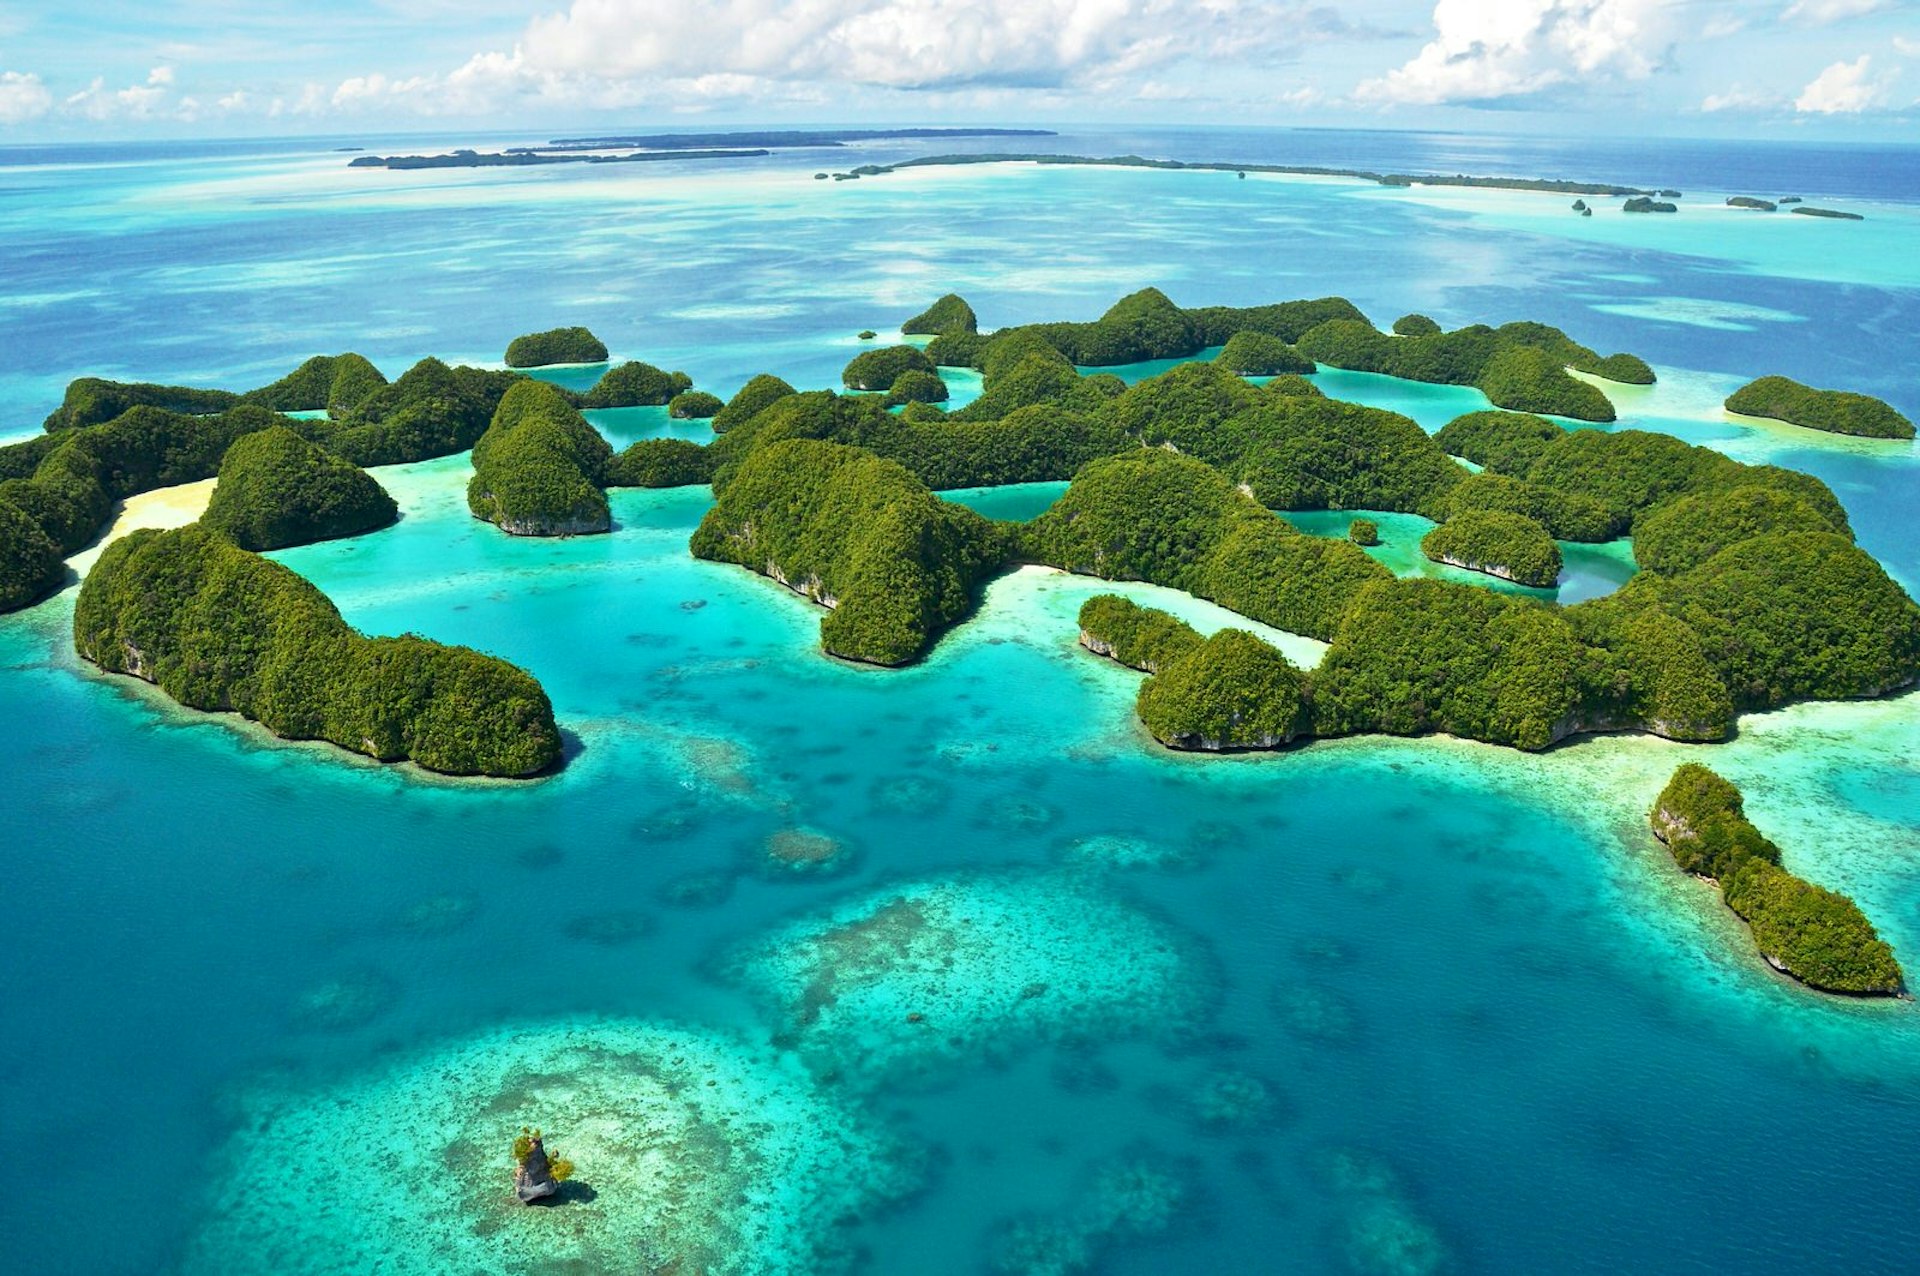 An aerial shot of the islands of Palau. The small lumpy islands are covered in dense greenery and surrounded by jewel-blue waters. 